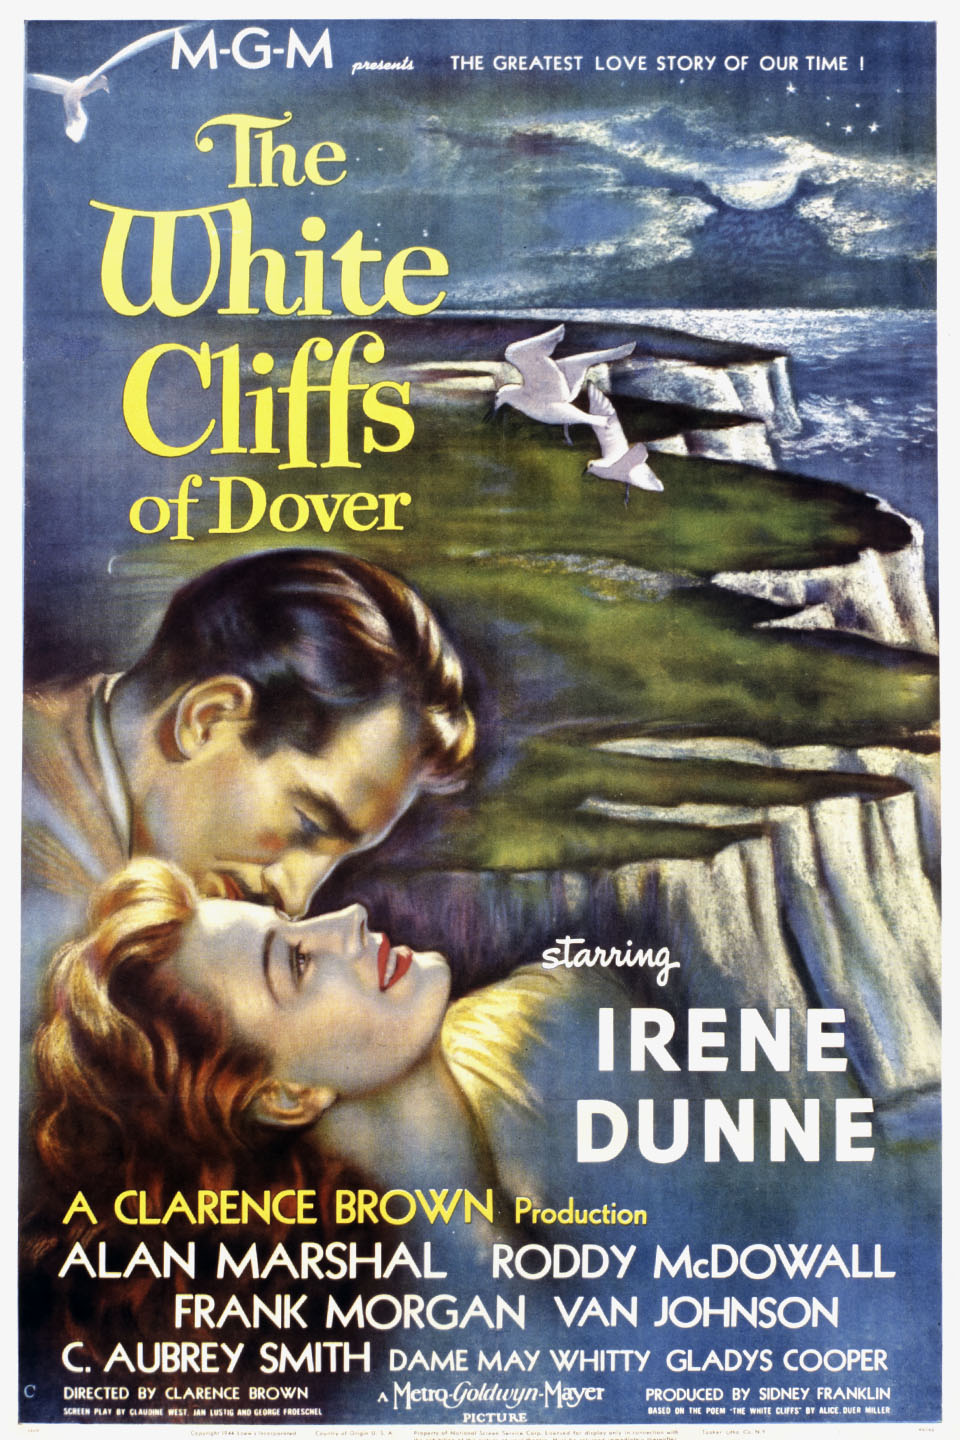 THE WHITECLIFFS OF DOVER (1944)